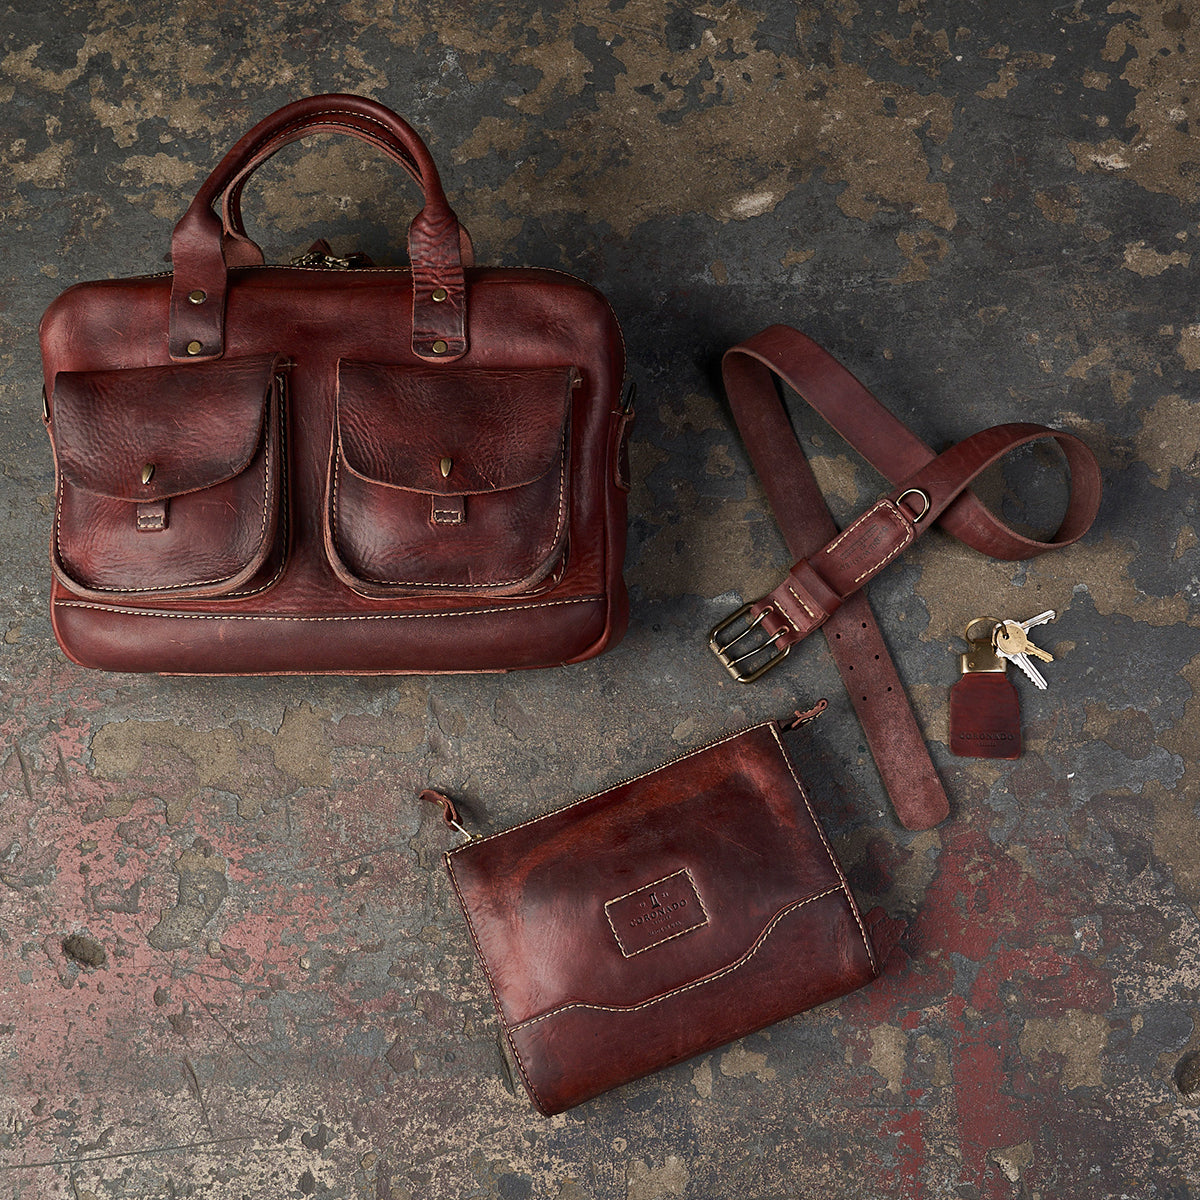 Stone-Washed Briefcase No. 100 (Russet LE)